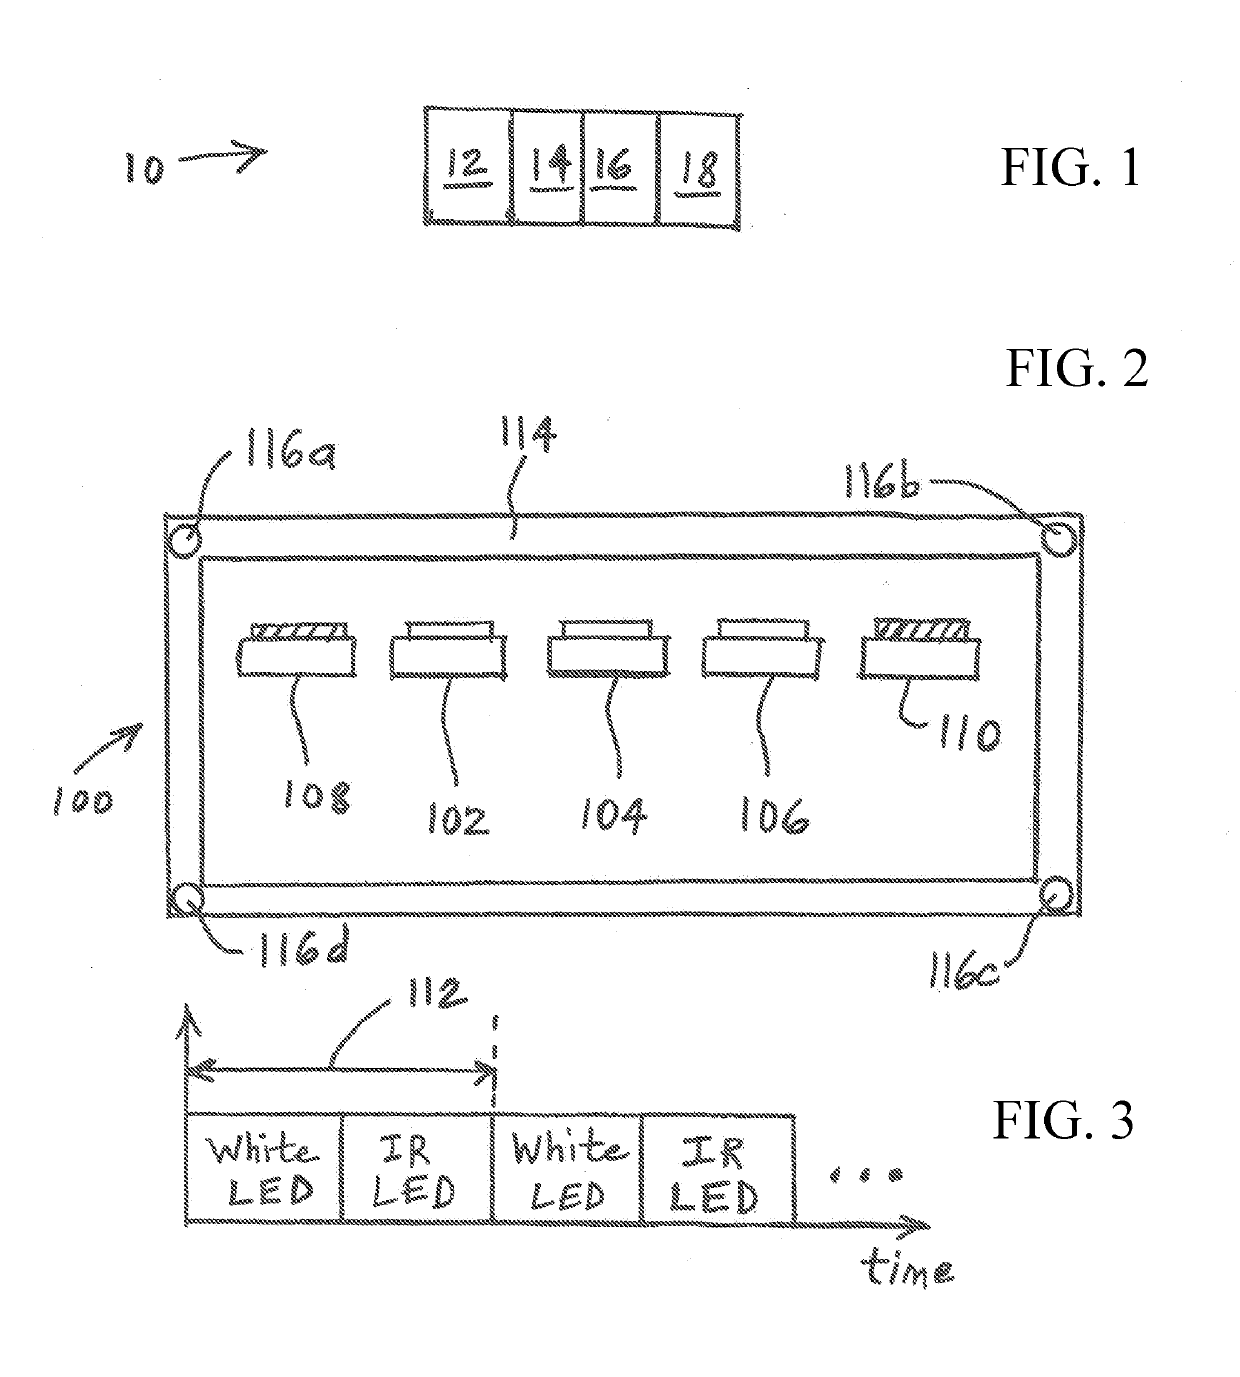 Backlight embedded infrared proximity sensing and gesture control